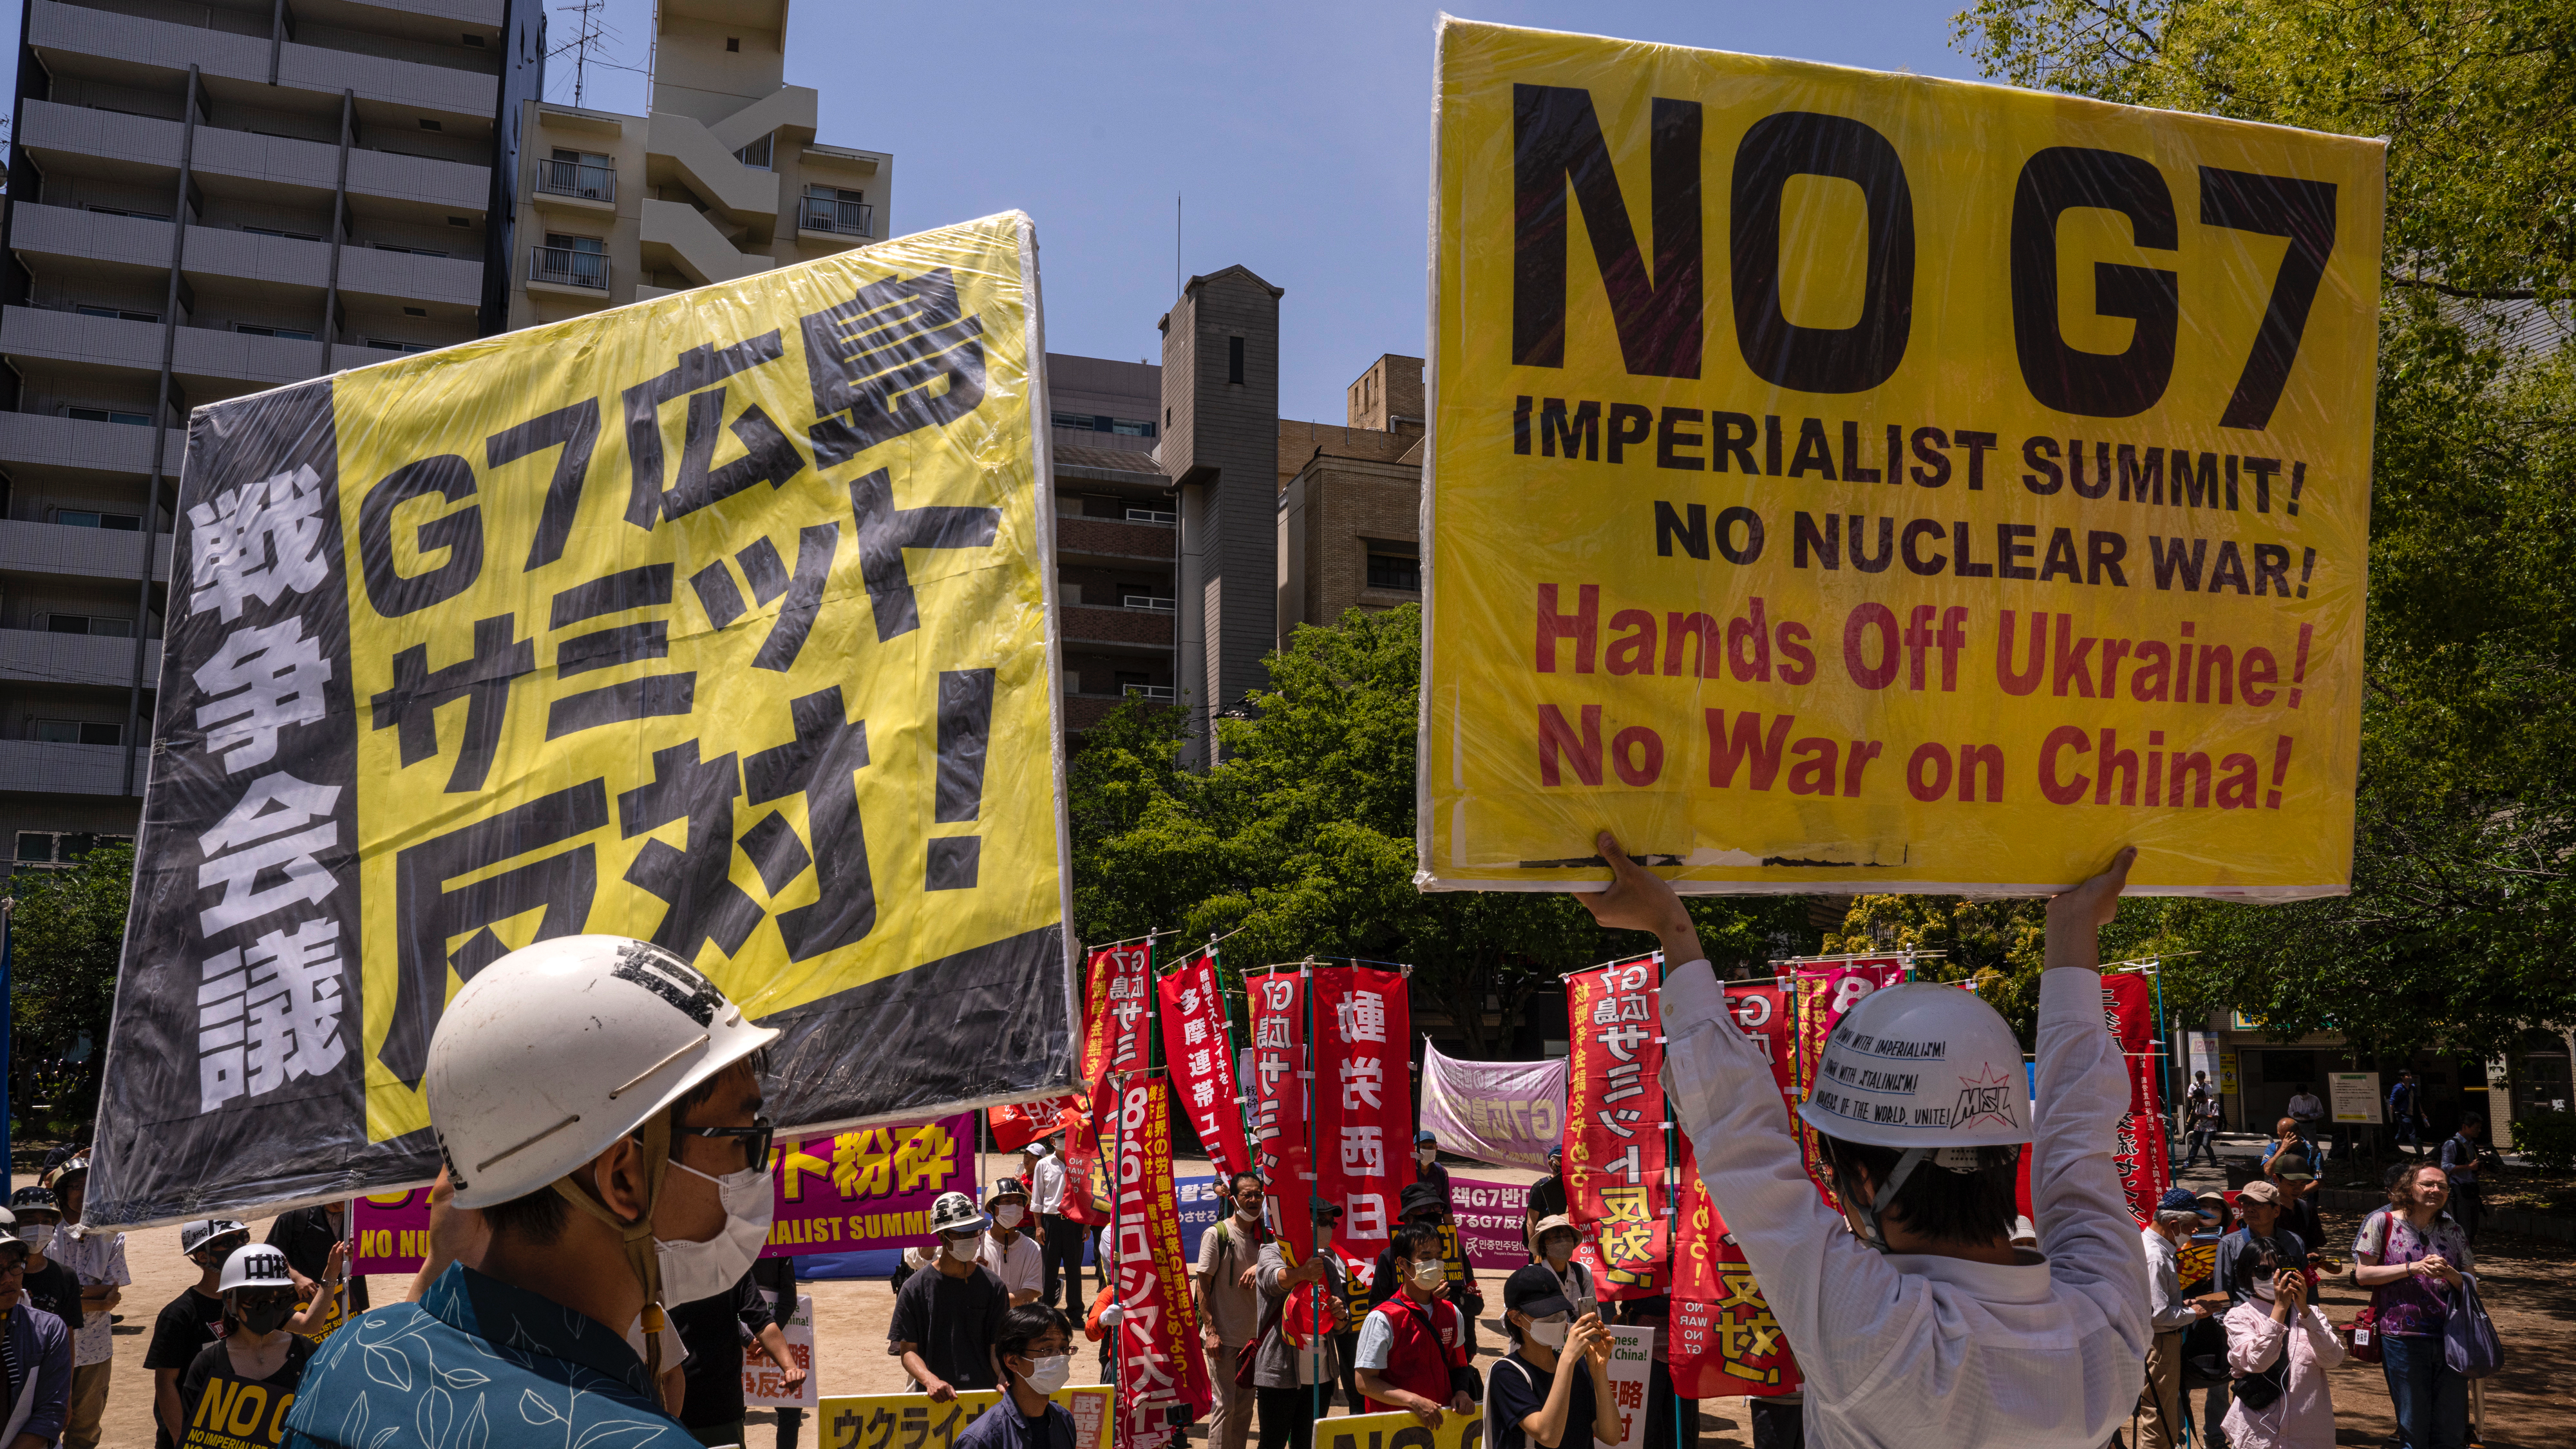 People rally in a protest against the G7 Summit in Hiroshima, Japan, May 21, 2023. /Xinhua